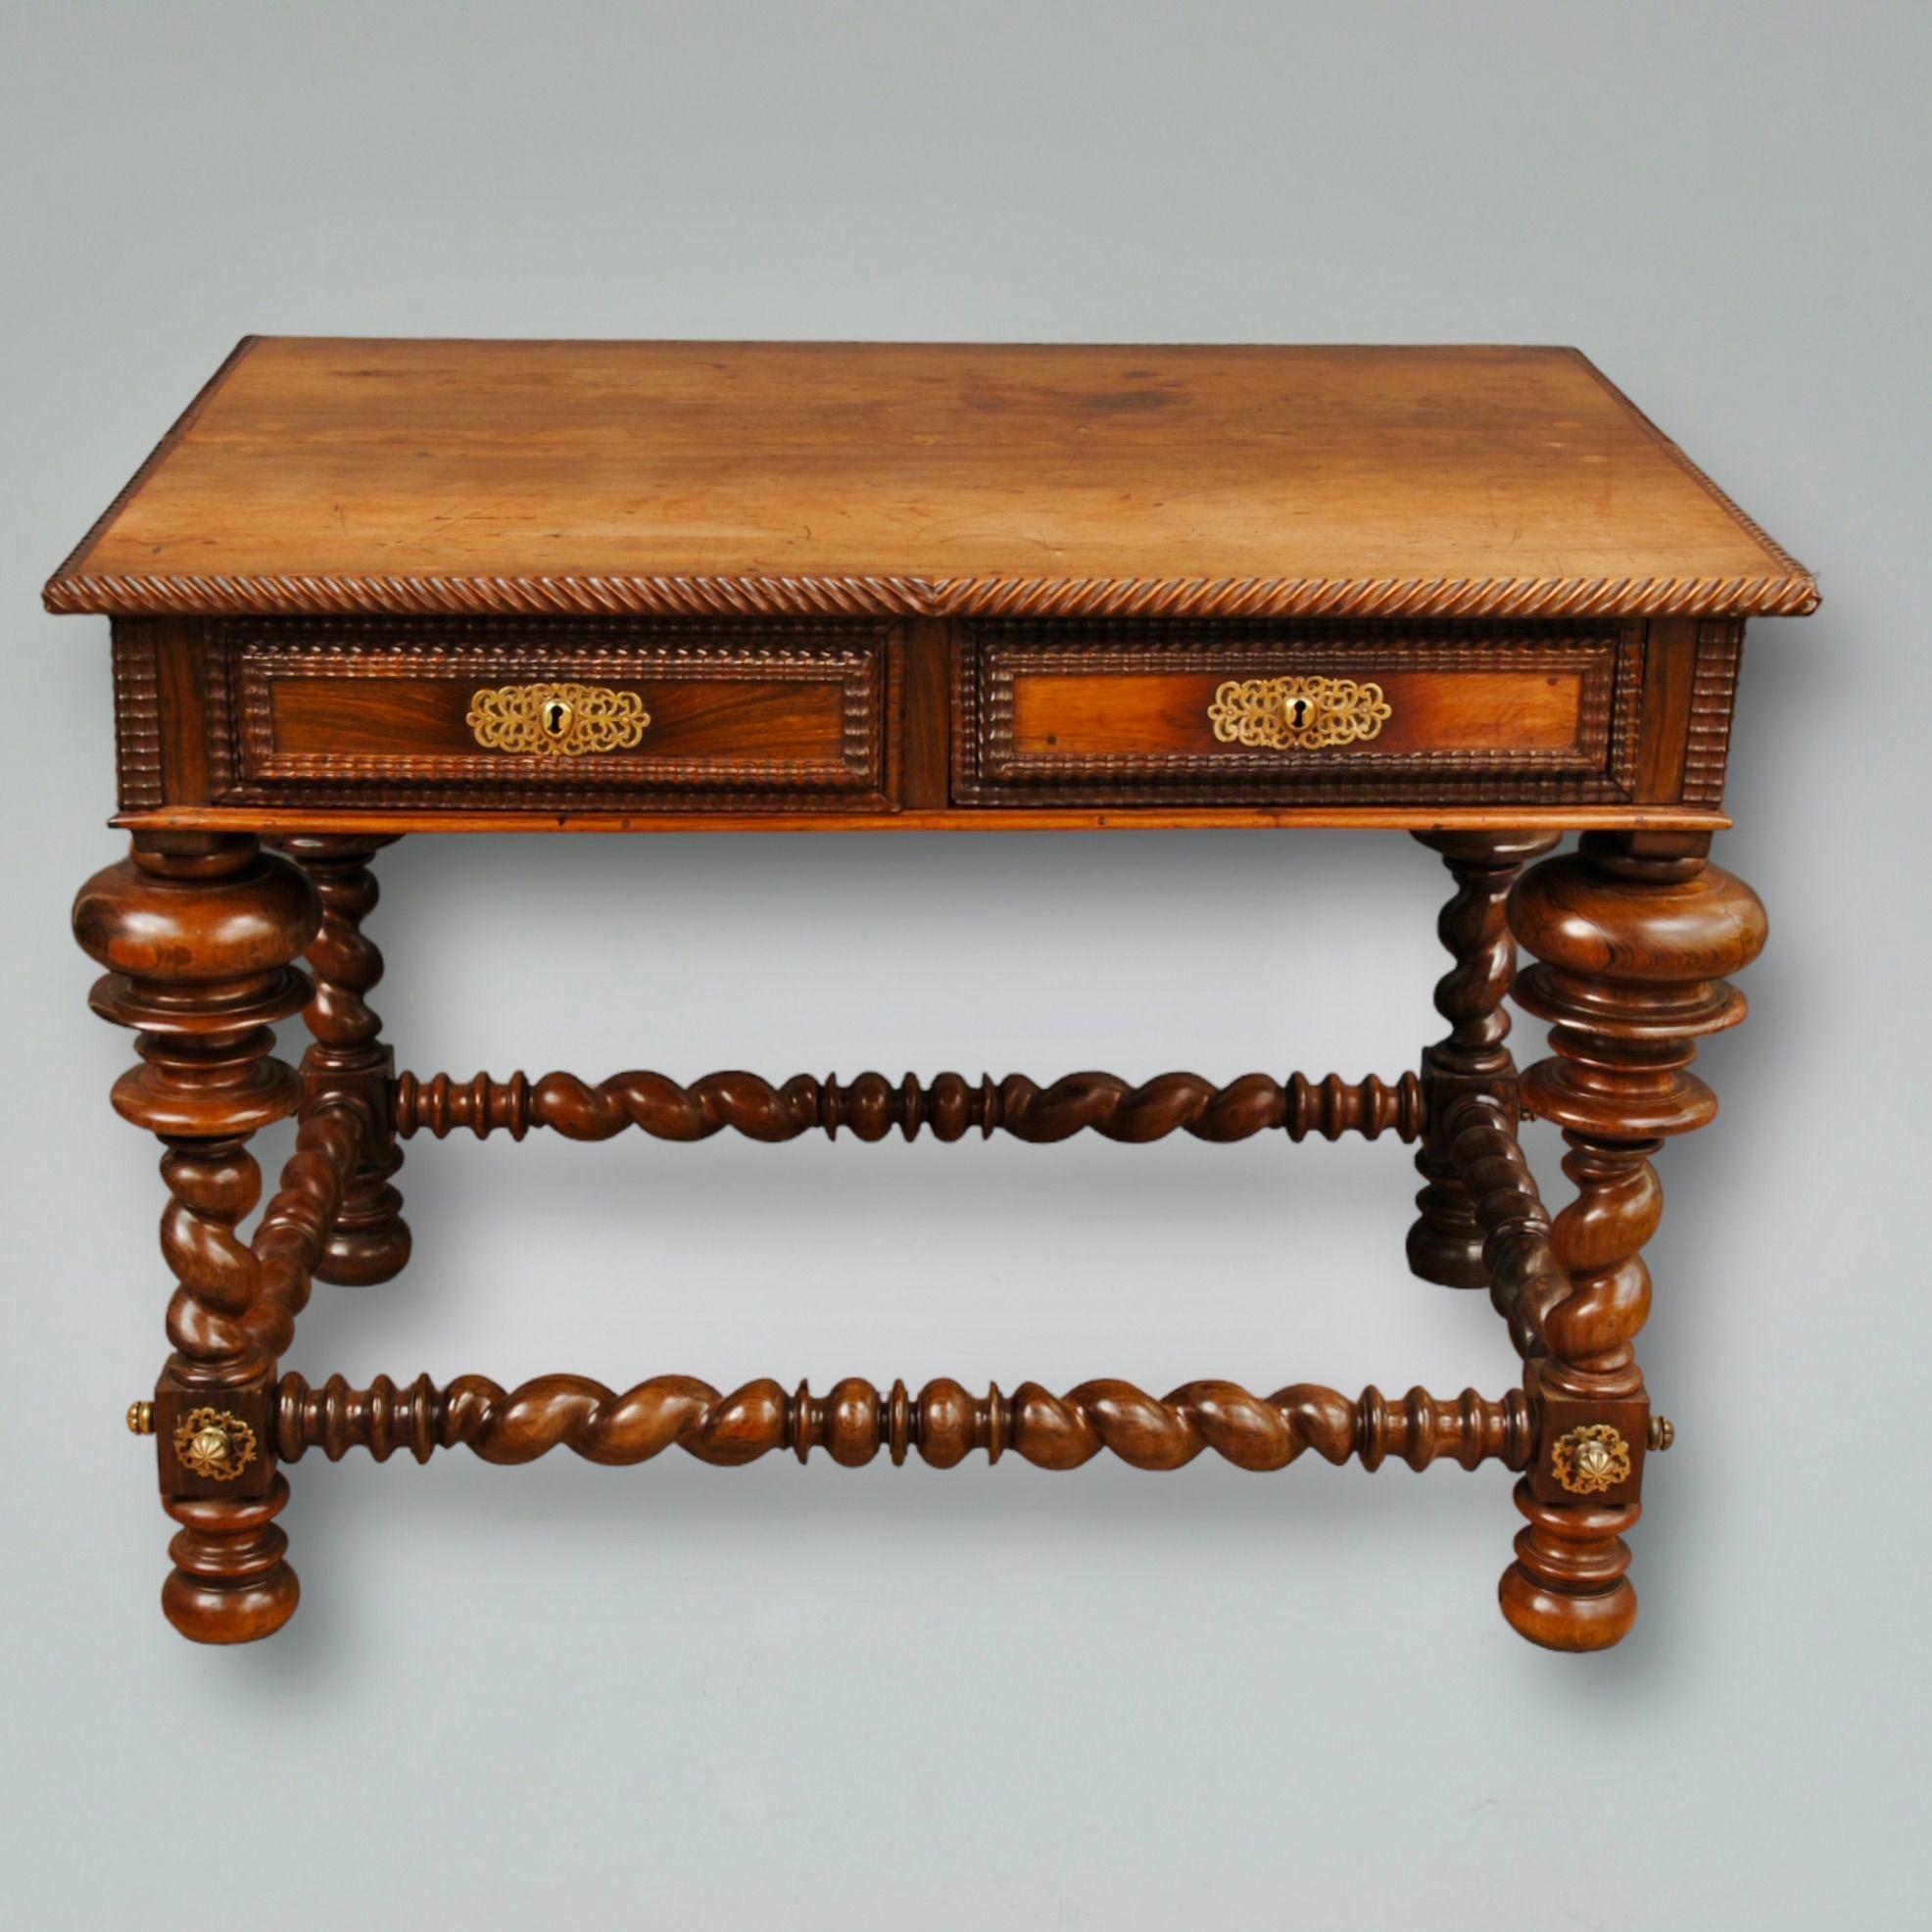 A fine example of a Portuguese rosewood table with turned bulbous legs and ripple moulds. This table has a rosewood top as many are teak and has a great colour and patination.